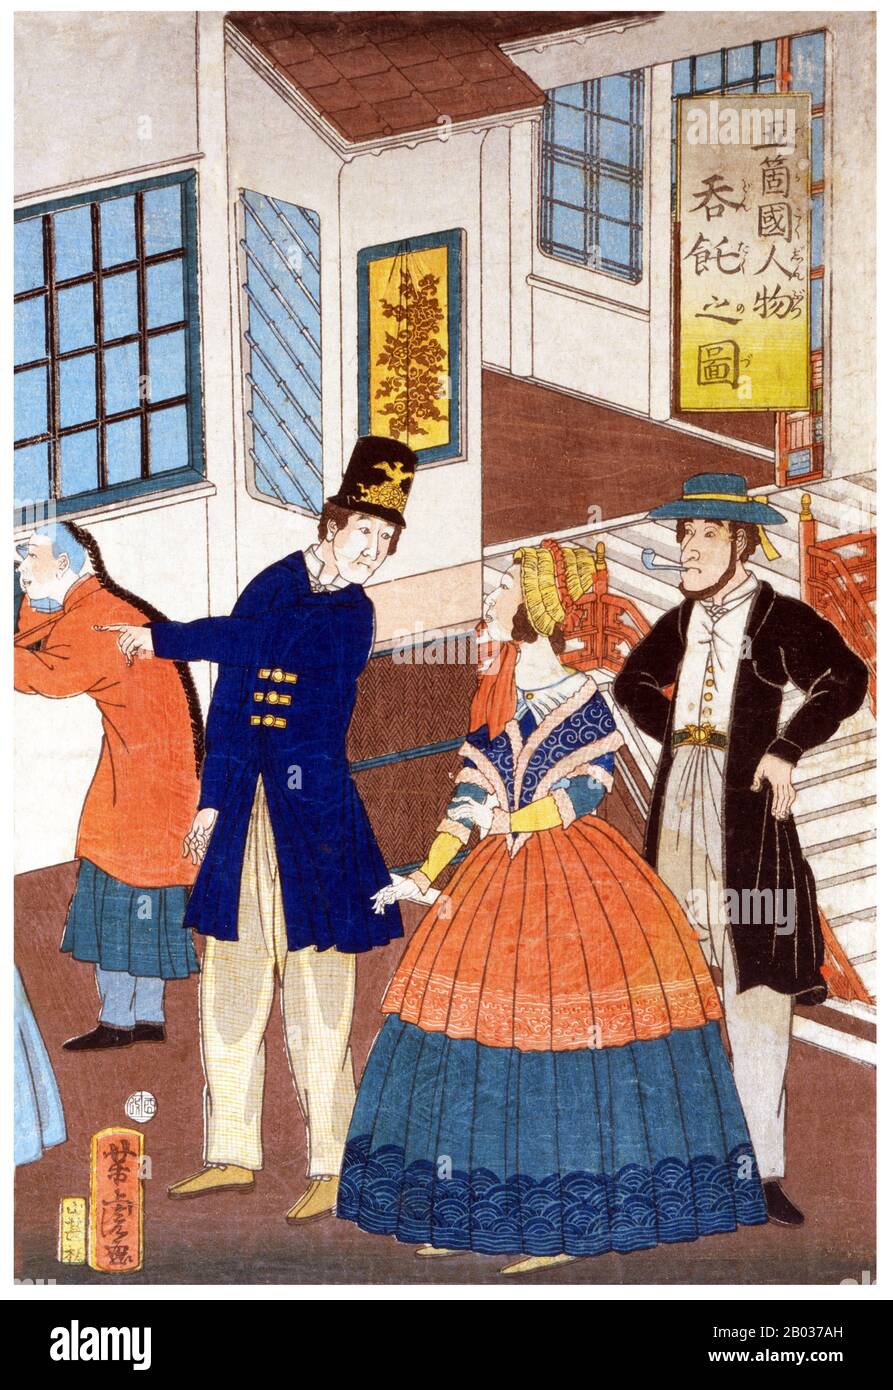 Japanese triptych print shows the interior of a foreign settlement house with several women and men enjoying a tea party, and a view of ships in the harbor in the background, Yokohama, Japan.  Utagawa Yoshitora was a designer of ukiyo-e Japanese woodblock prints and an illustrator of books and newspapers who was active from about 1850 to about 1880. He was born in Edo (modern Tokyo), but neither his date of birth nor date of death is known. He was the oldest pupil of Utagawa Kuniyoshi who excelled in prints of warriors, kabuki actors, beautiful women, and foreigners (Yokohama-e). Stock Photo